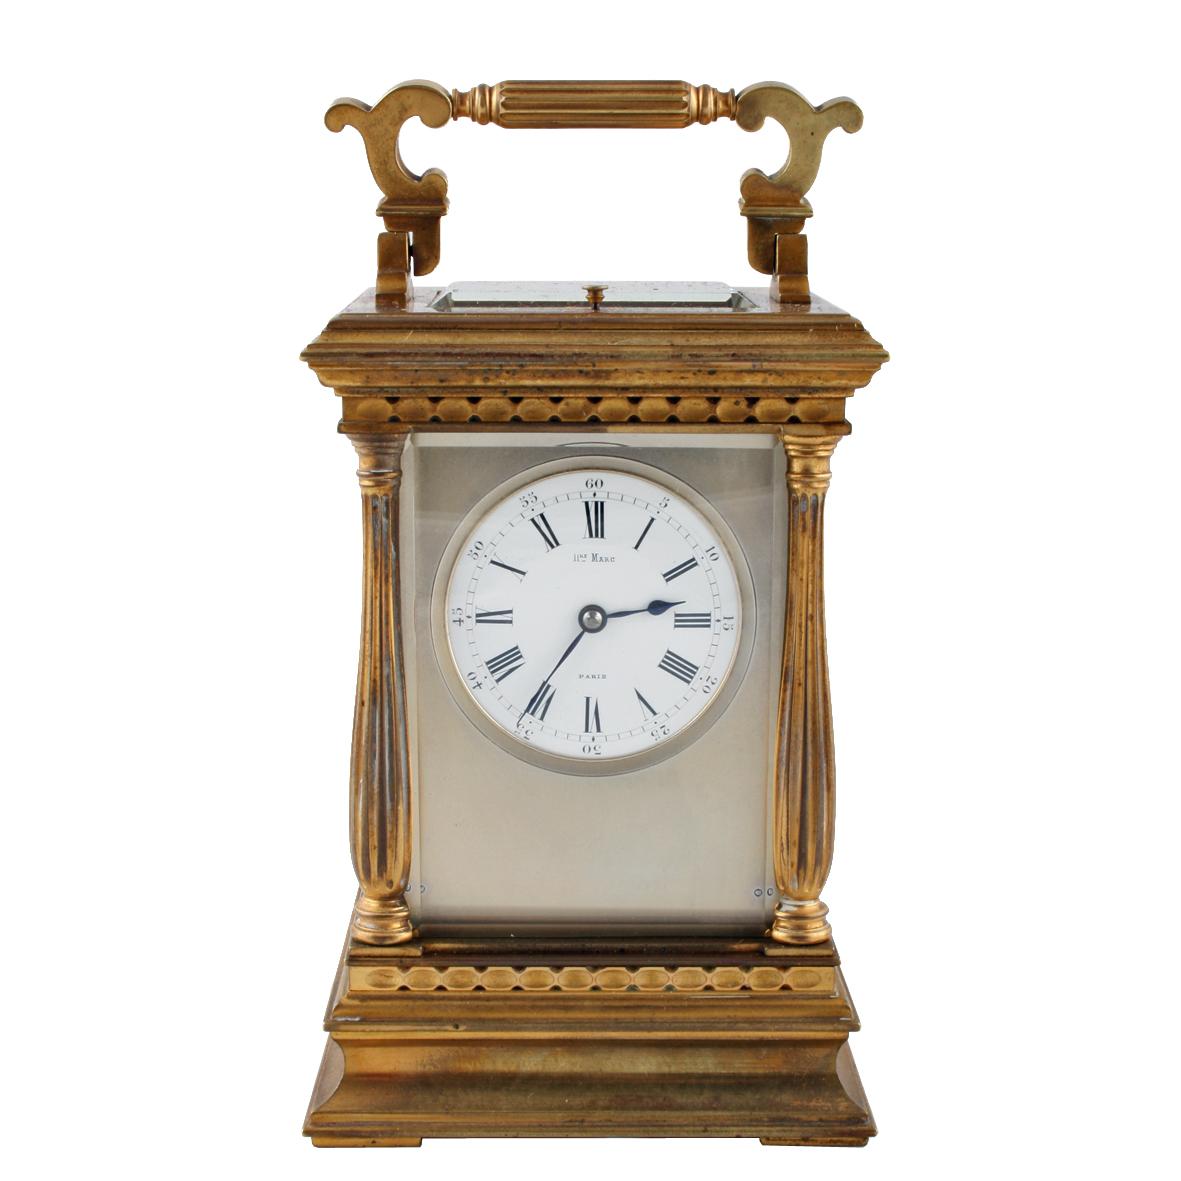 A 19th century French gilded brass carriage clock.

The clock has an eight day striking movement, a gilded case that has five bevelled glass panel sides and the dial is signed 'Henry Marc Paris'.

The rear door opens to adjust and wind the